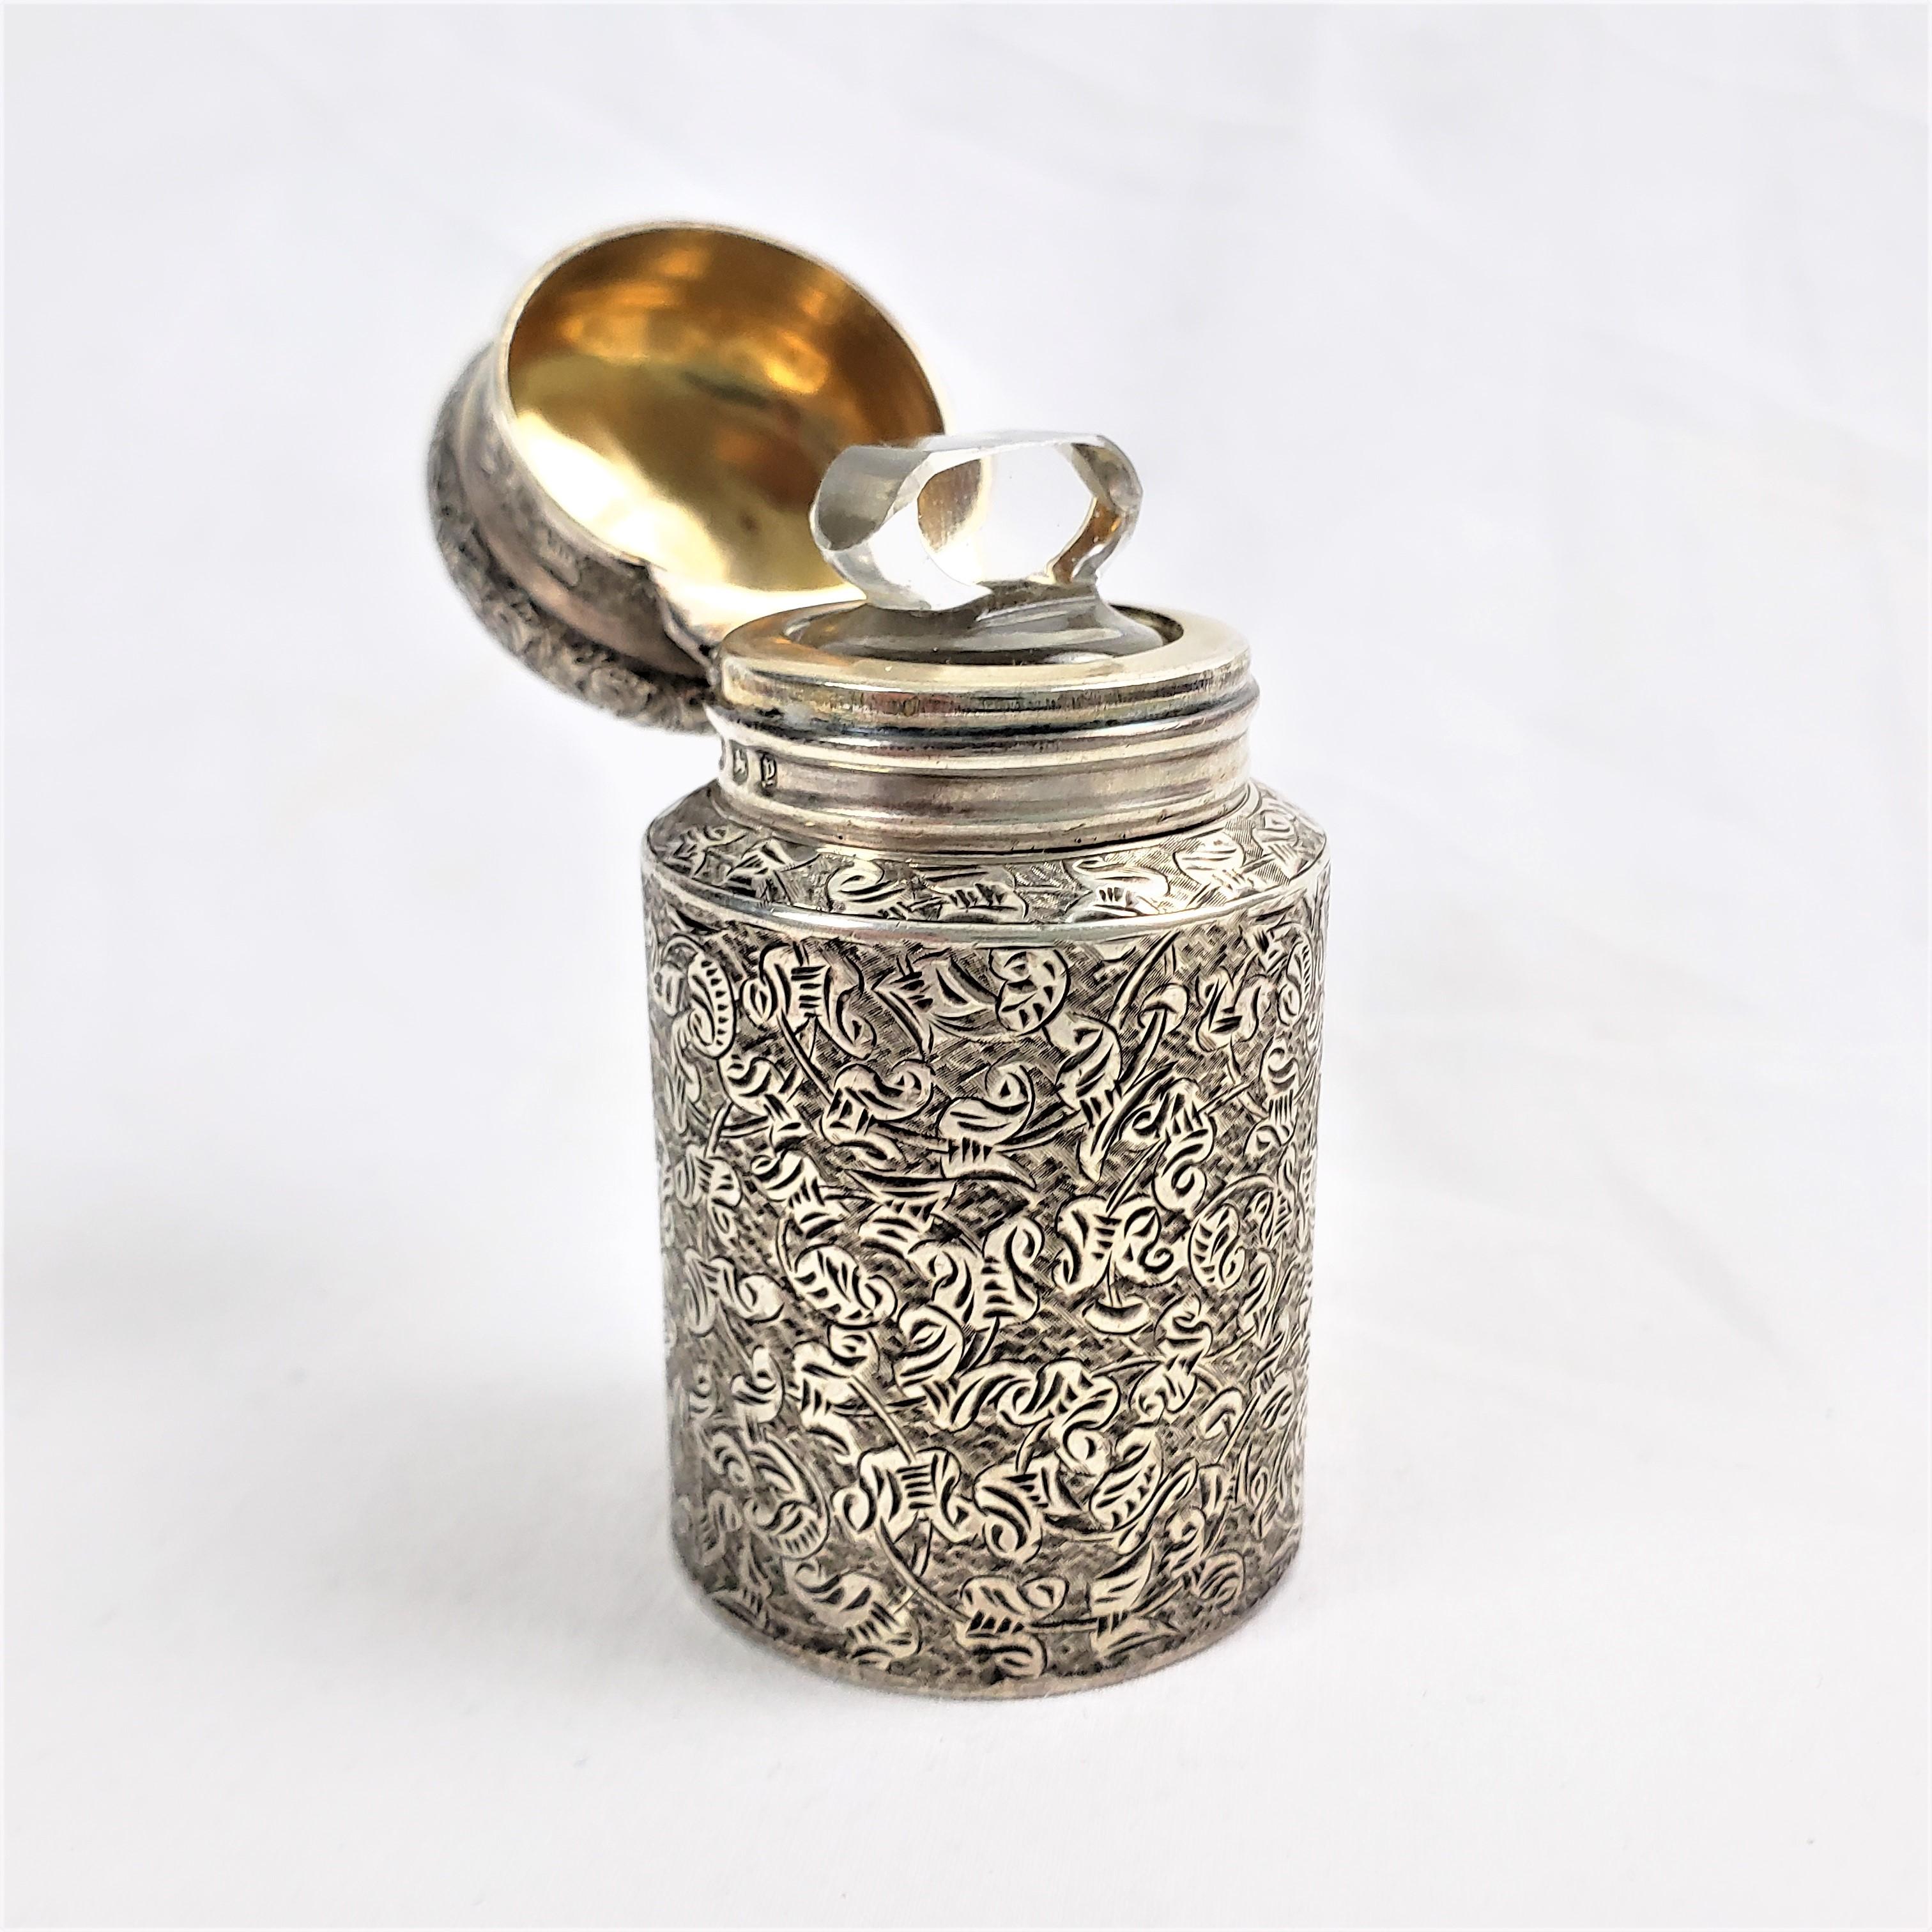 Antique Sterling Silver Scent or Perfume Bottle with Chased Decoration In Good Condition For Sale In Hamilton, Ontario